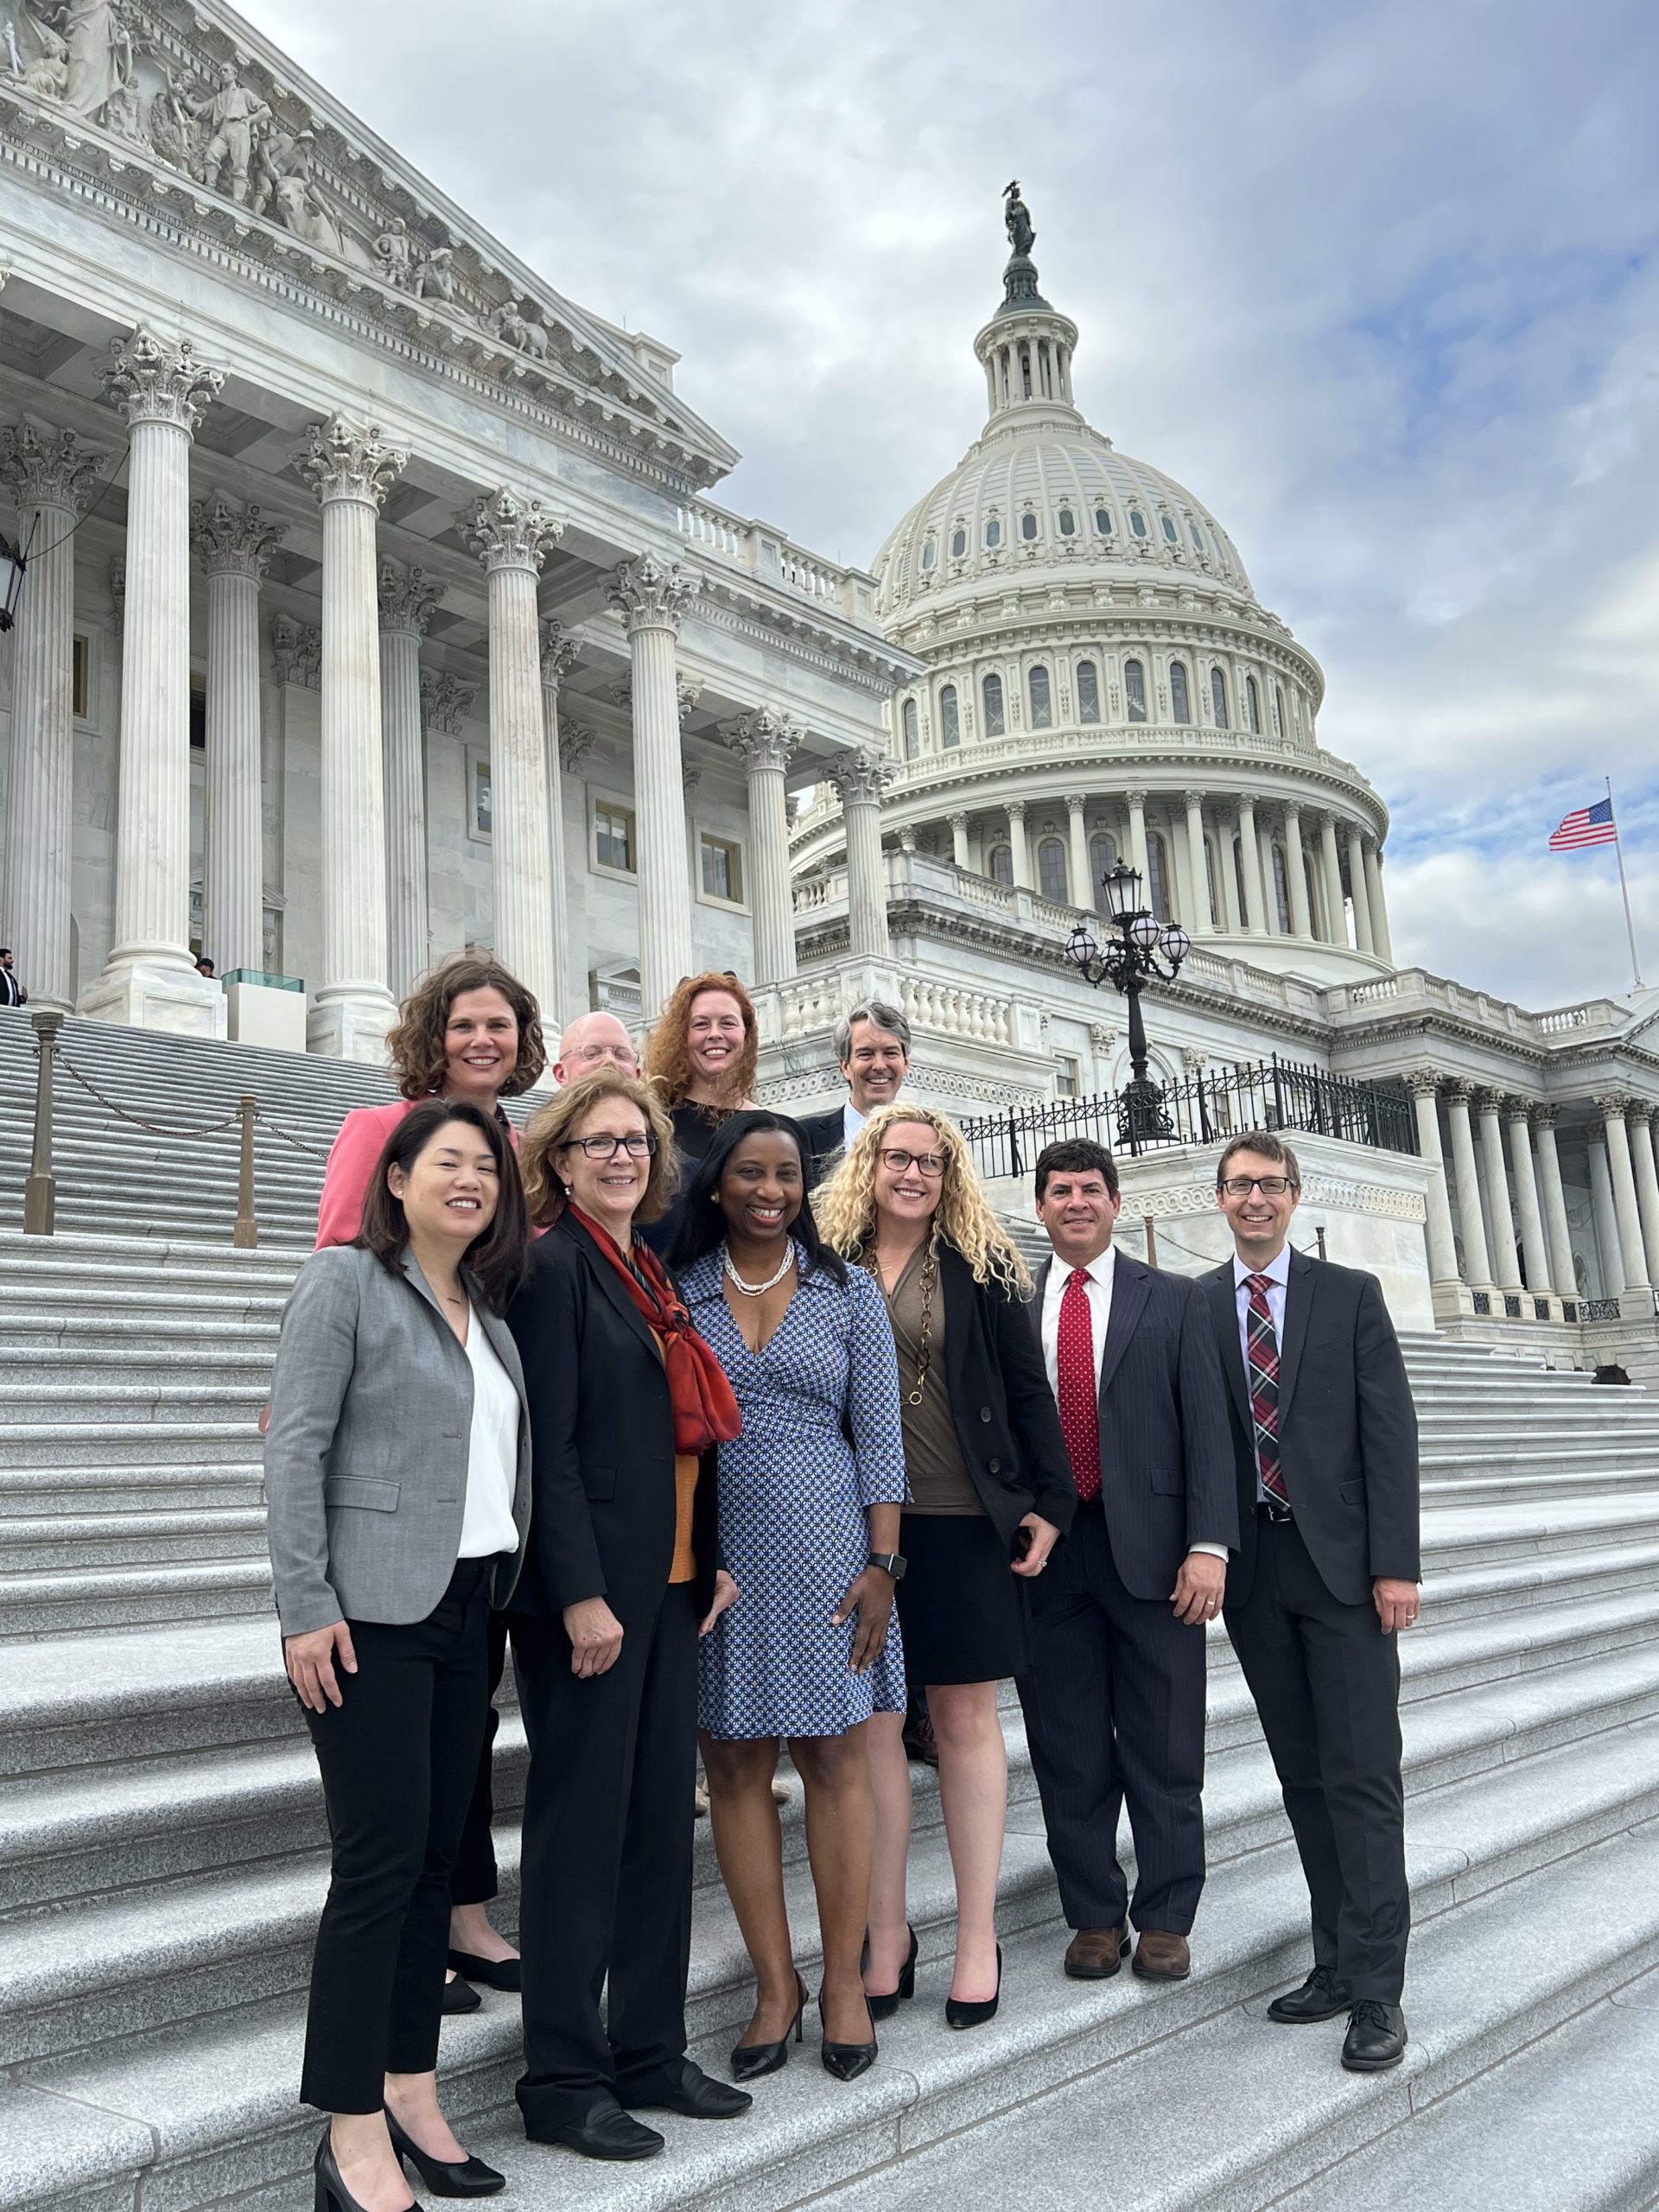 Members of the NABL Board of Directors on the steps of the U.S. Capitol Building.